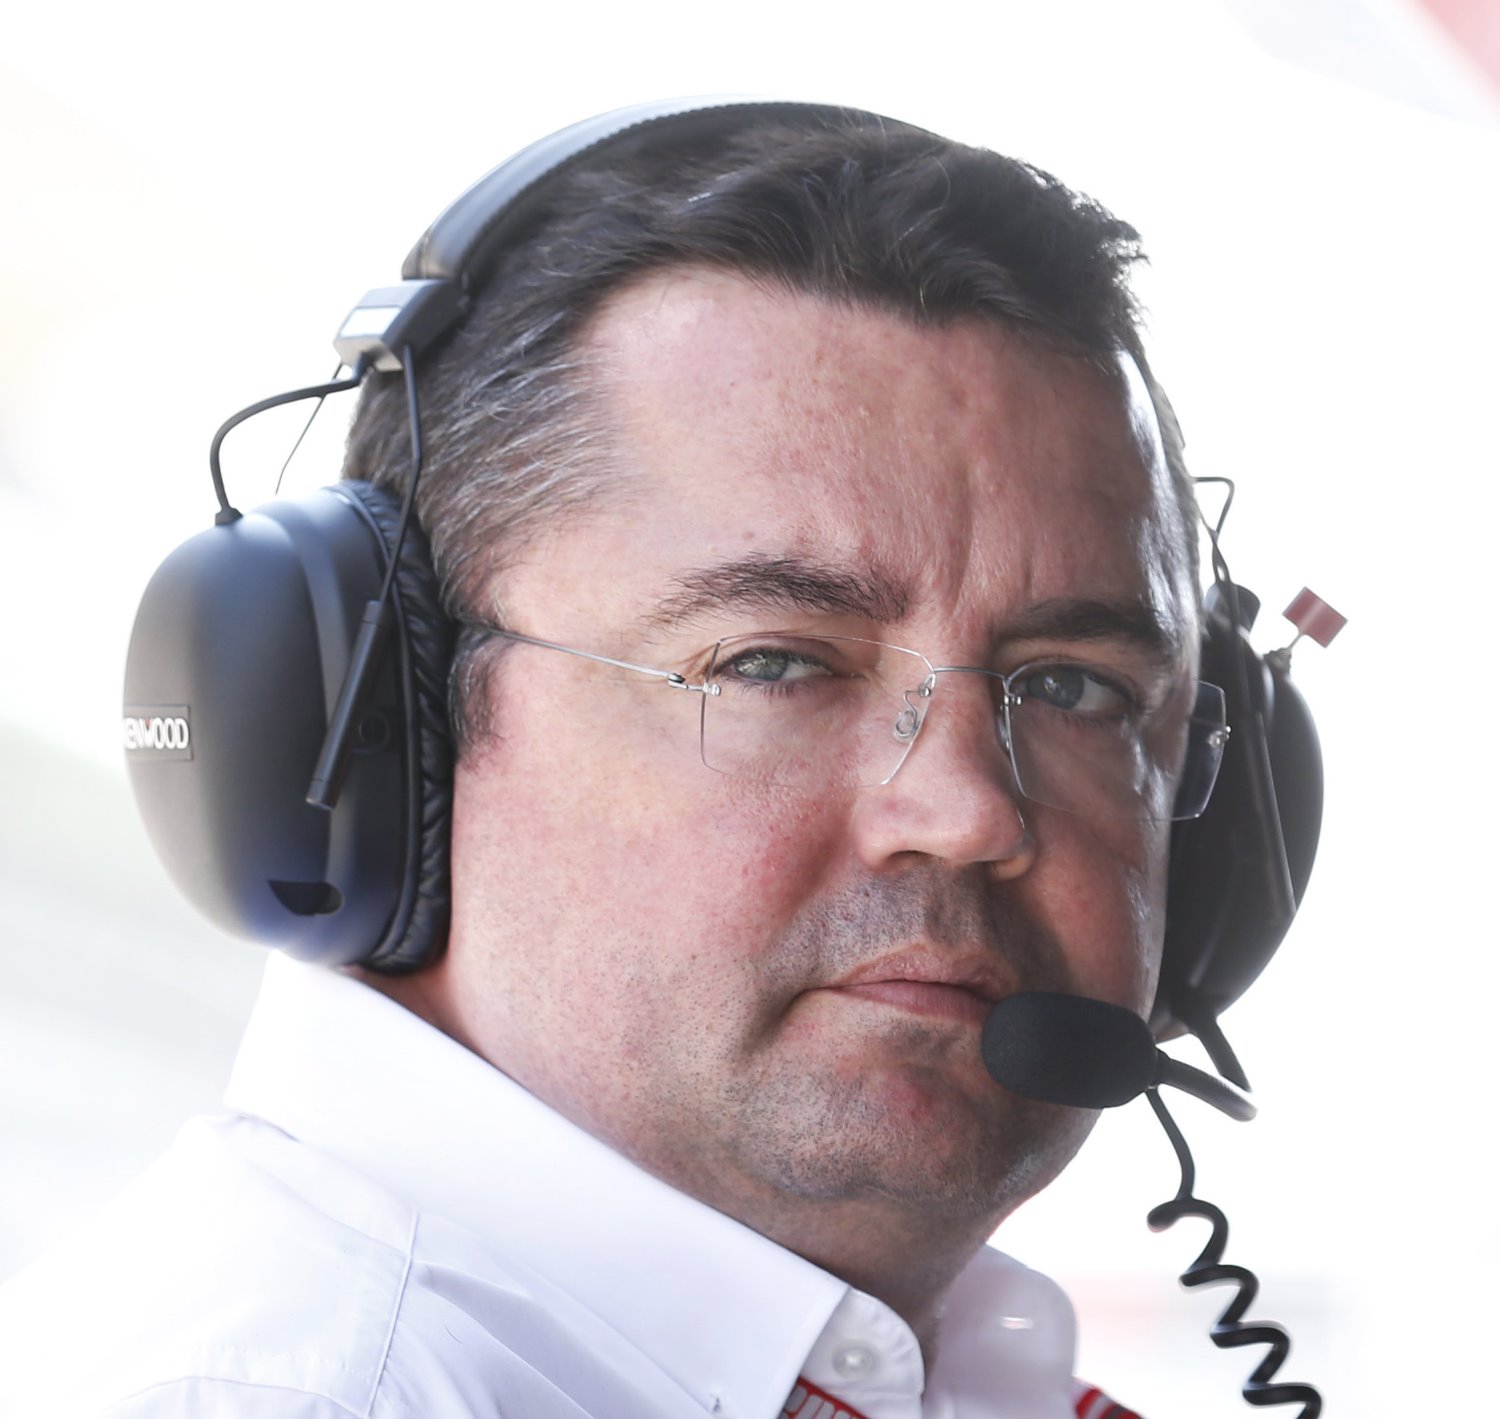 Eric Boullier, like his boss Ron Dennis, are hallucinating if they think they are going to beat the Aldo Costa designed Mercedes and Adrian Newey designed Red Bulls